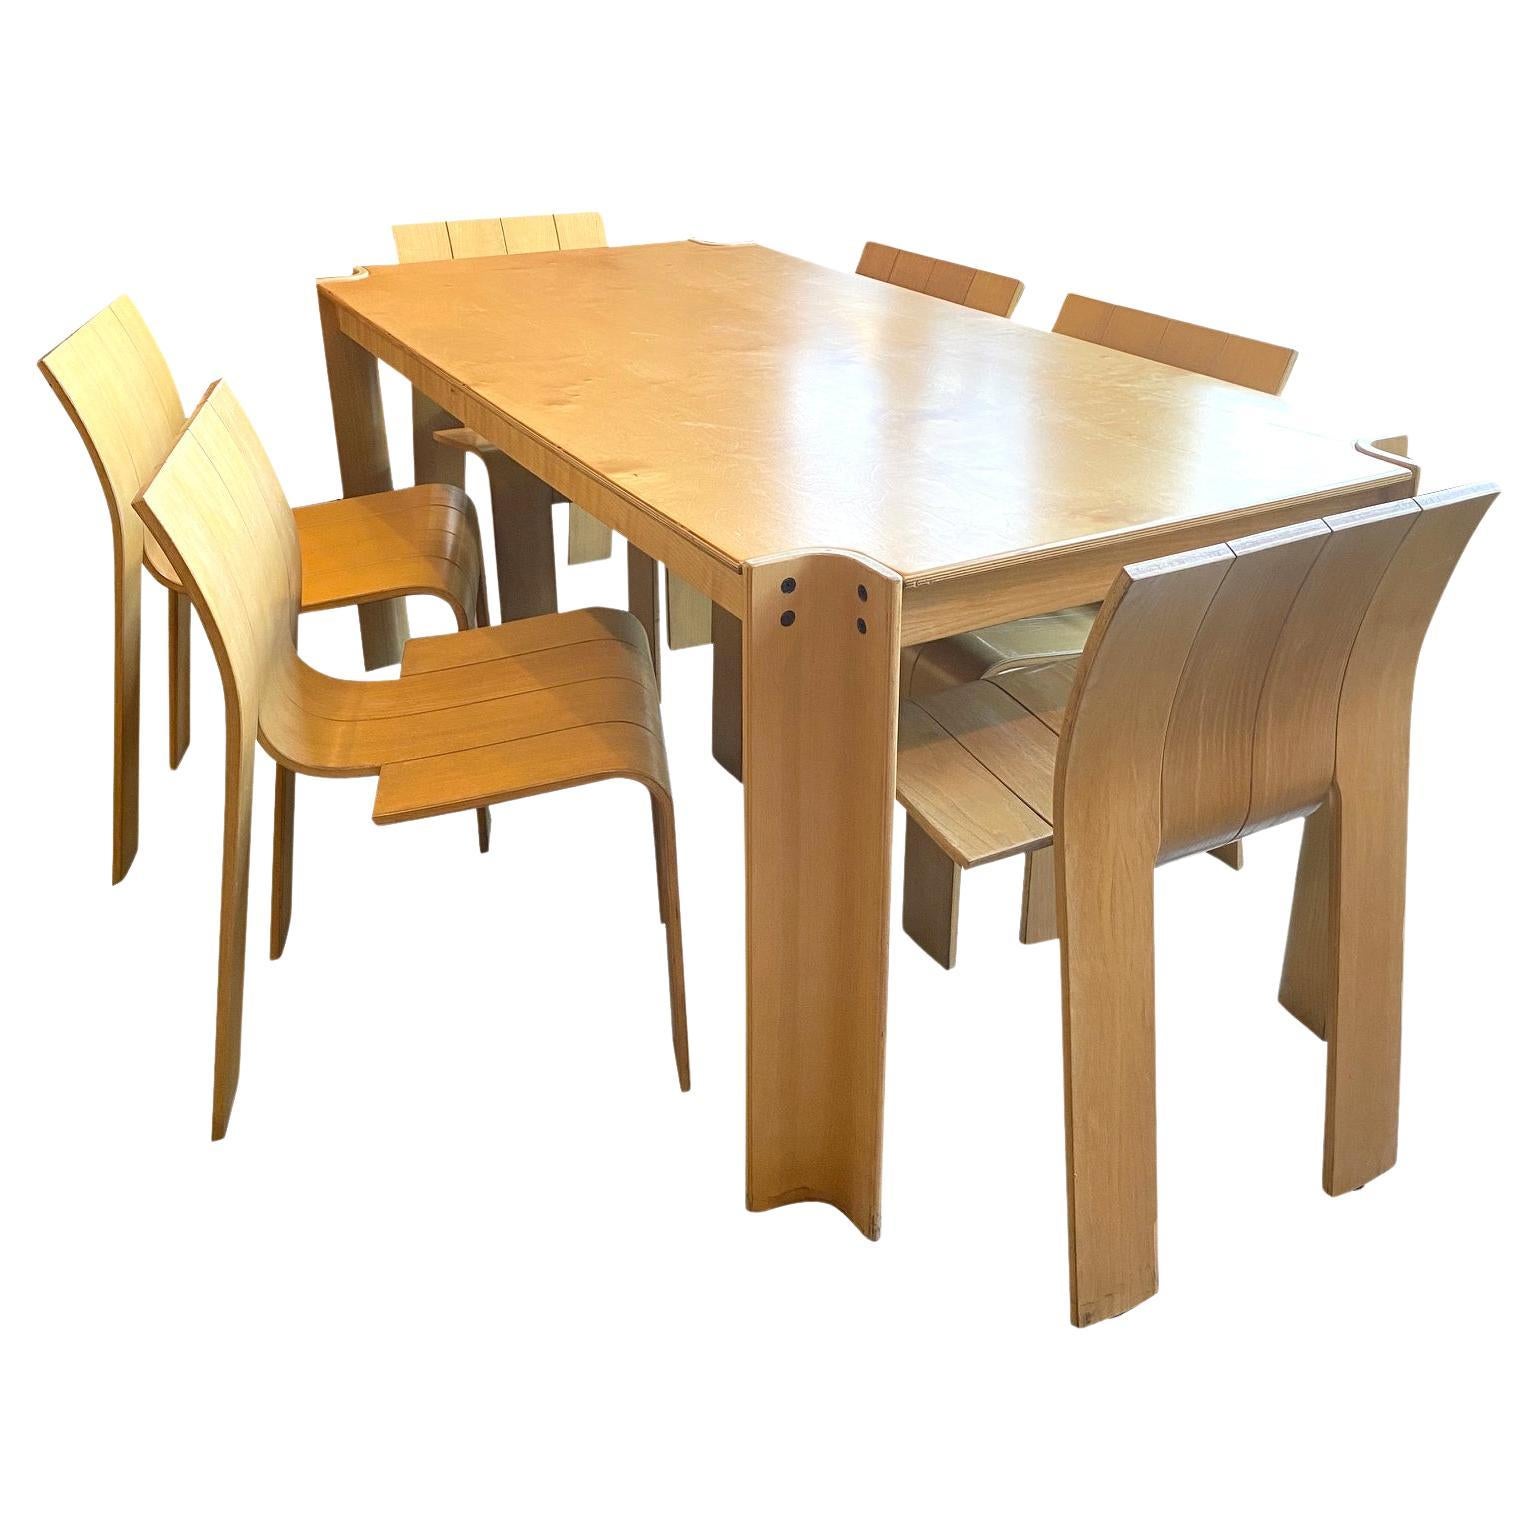 Bakker “Strip” Dining Table and Chair Set, NL, 1970’s For Sale